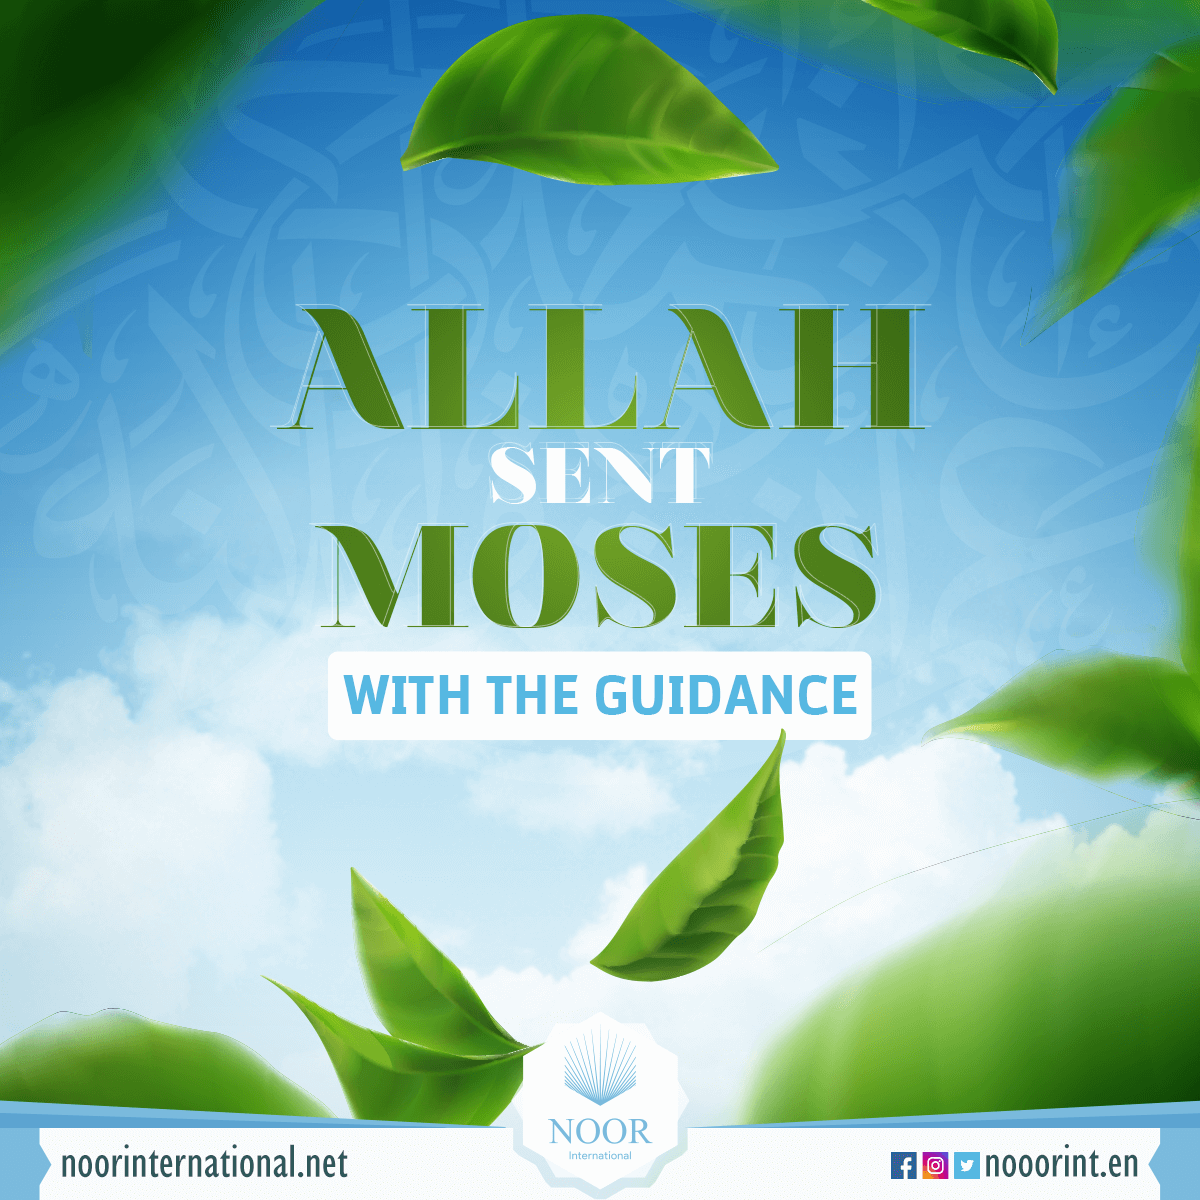 Allah sent Moses with the guidance